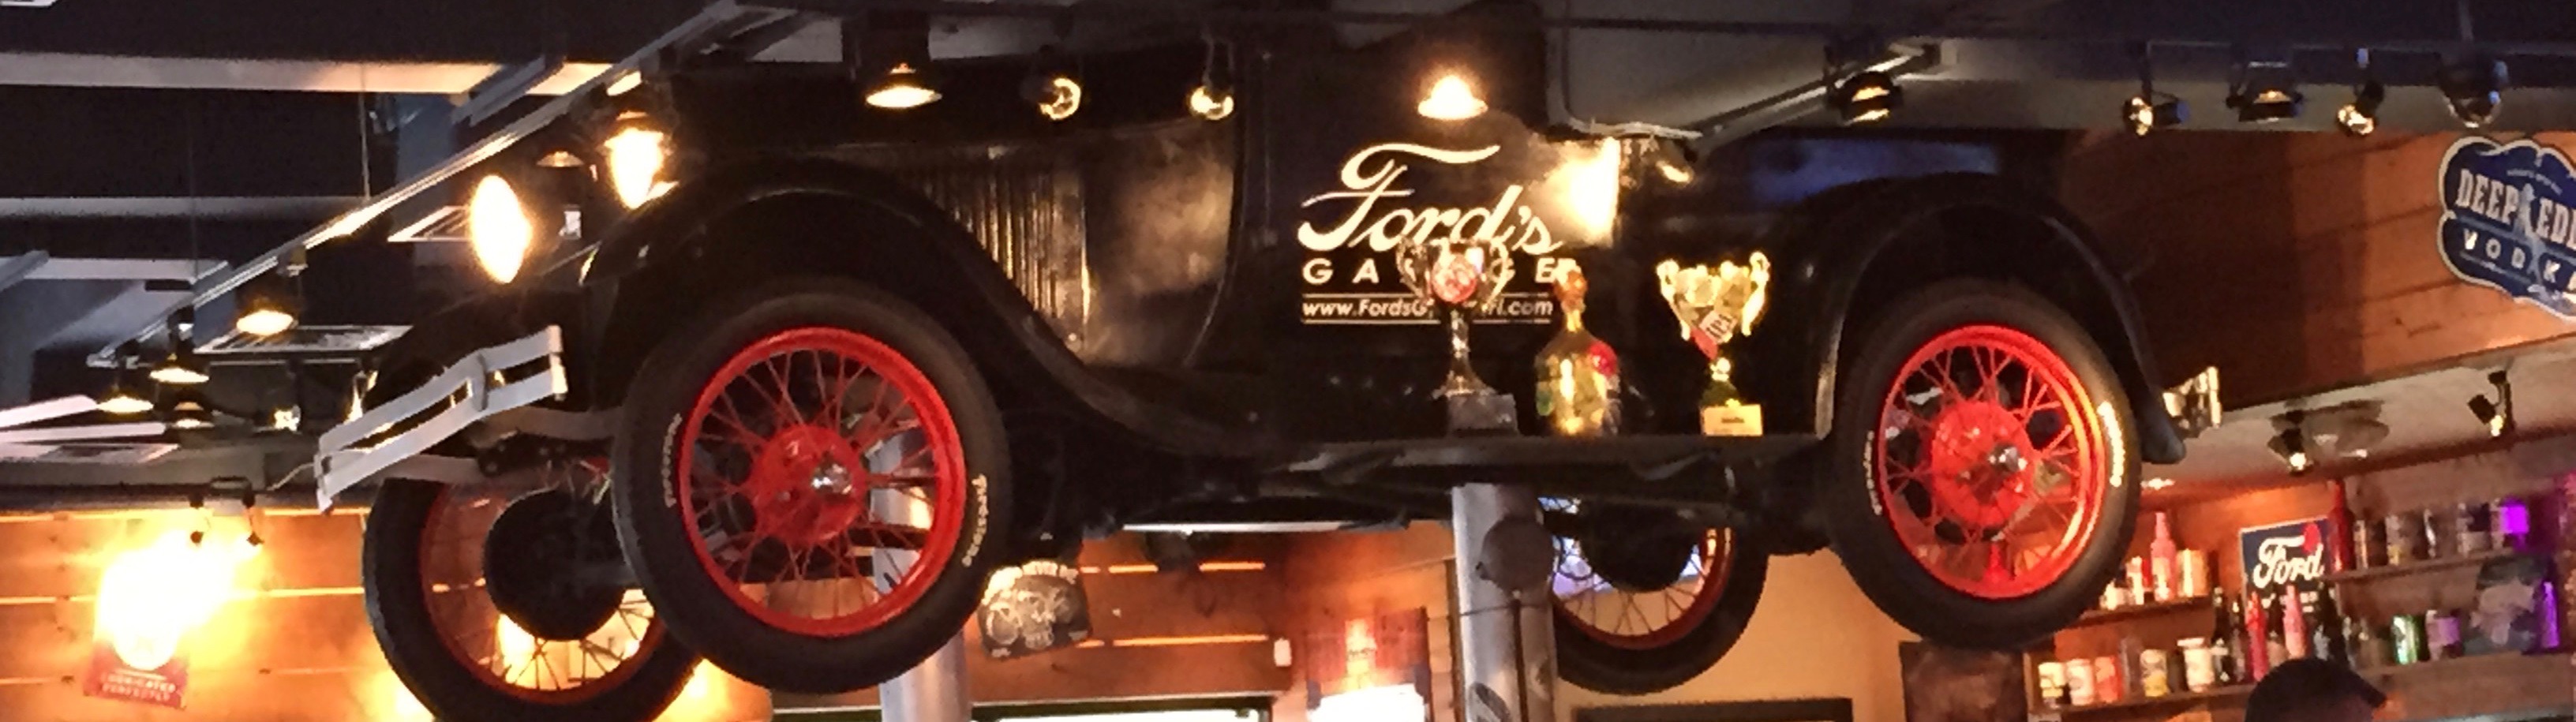 Tipsy Tourist: Ford’s Garage | A Day Away Travel